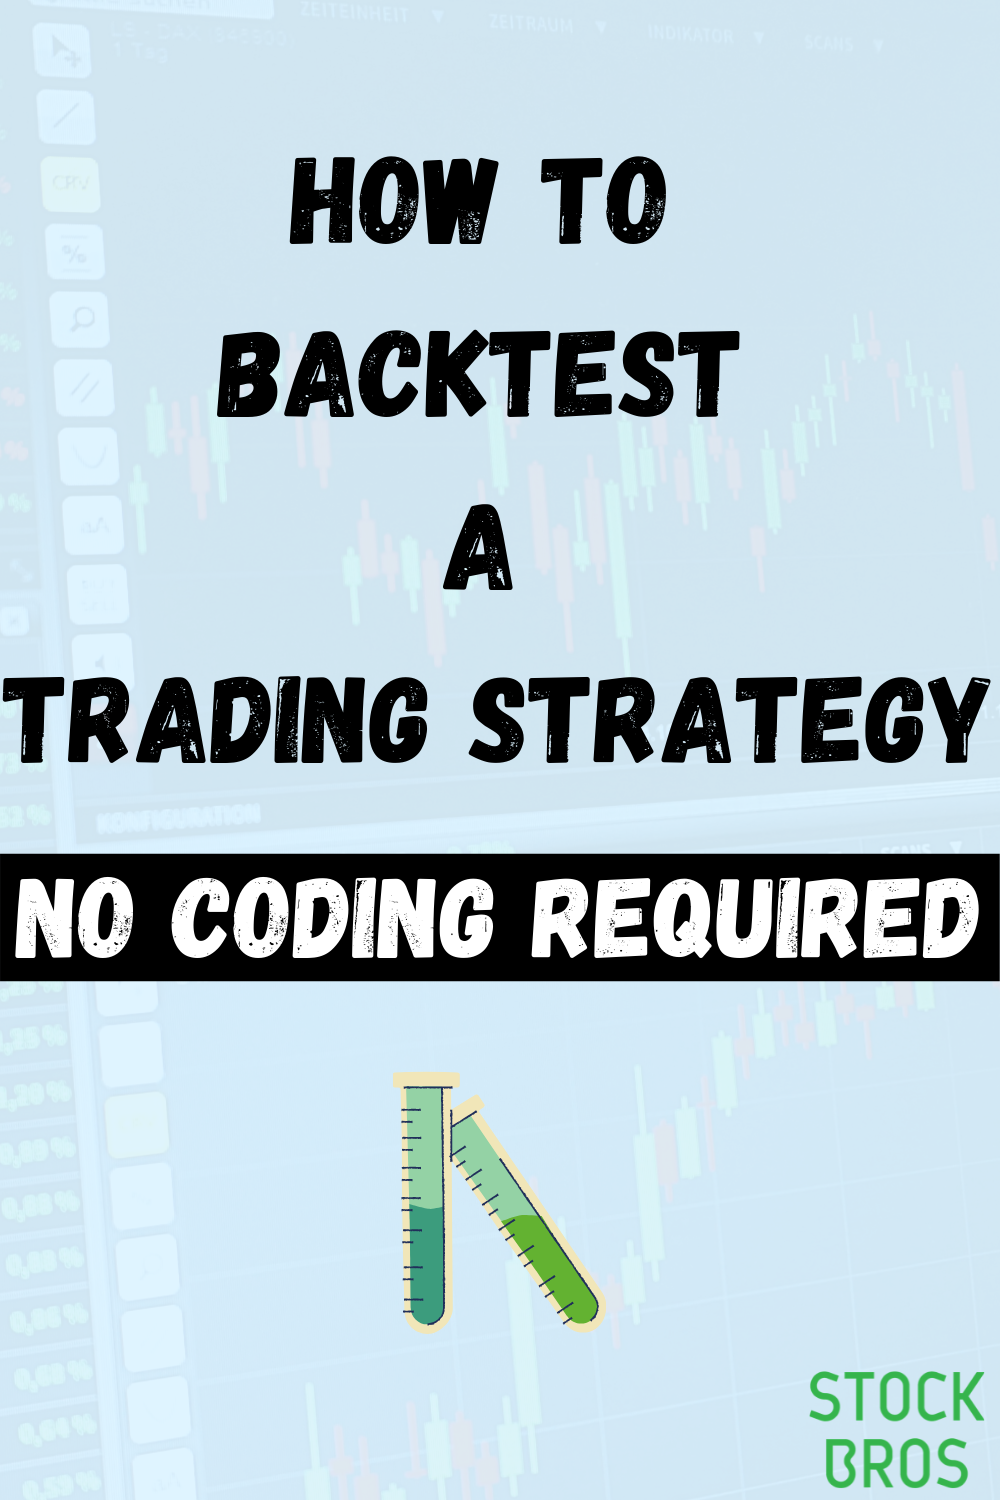 How to backtest a stock trading strategy - no coding required